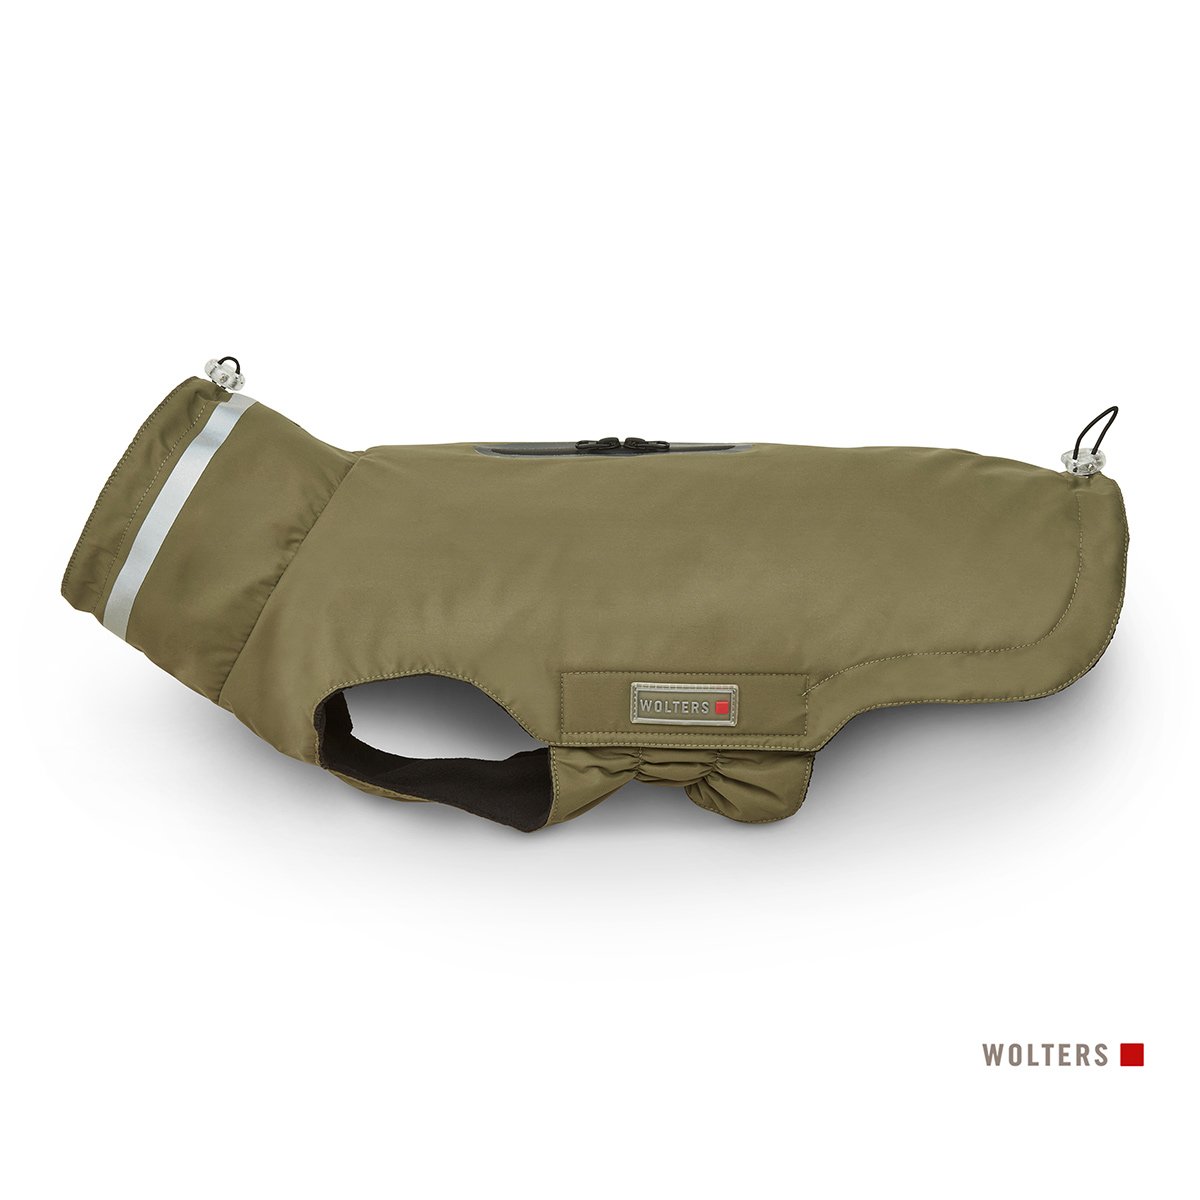 Wolters Outdoorjacke Modern Classic olive 32 cm von Wolters Cat&Dog